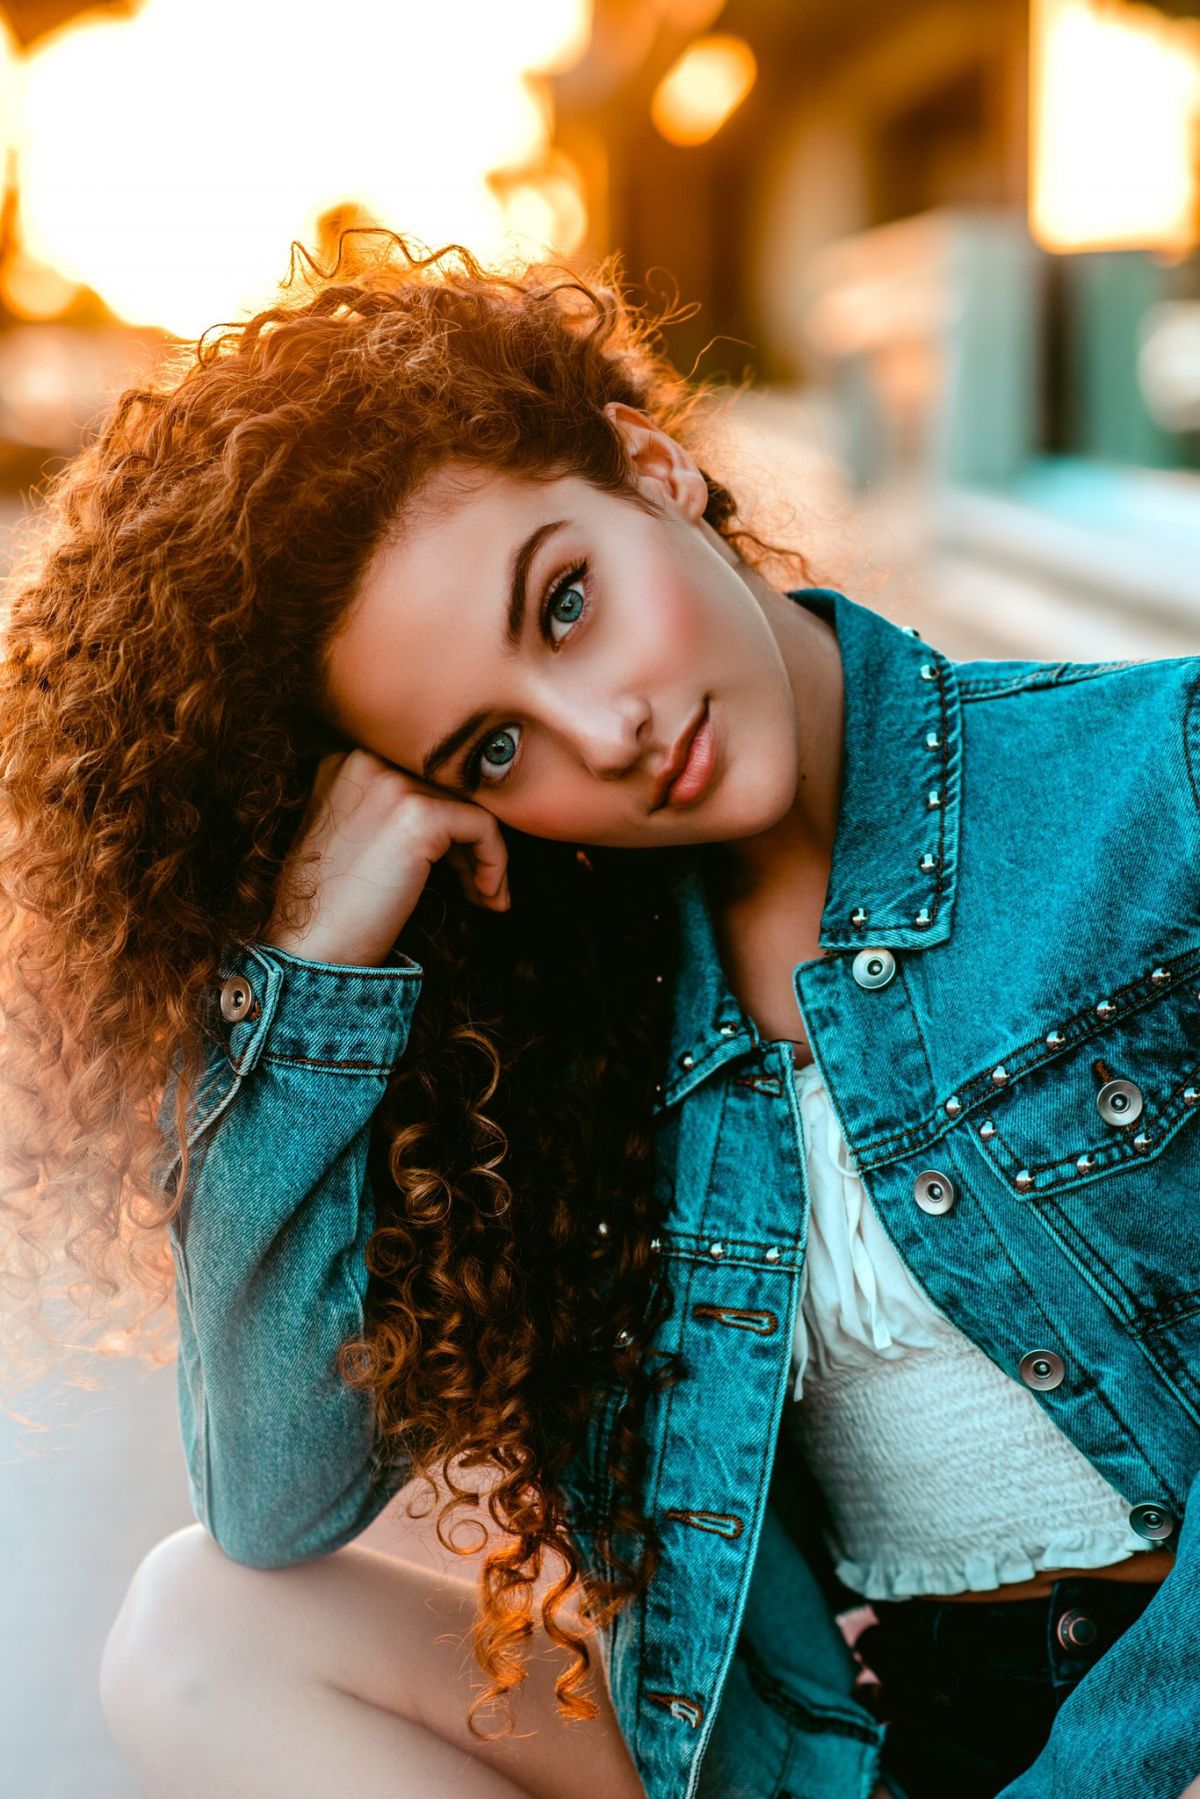 Women Model Redhead Long Hair Sofie Dossi Curly Hair Face Portrait Display Blue Eyes Jeans Jacket Wo 1200x1799